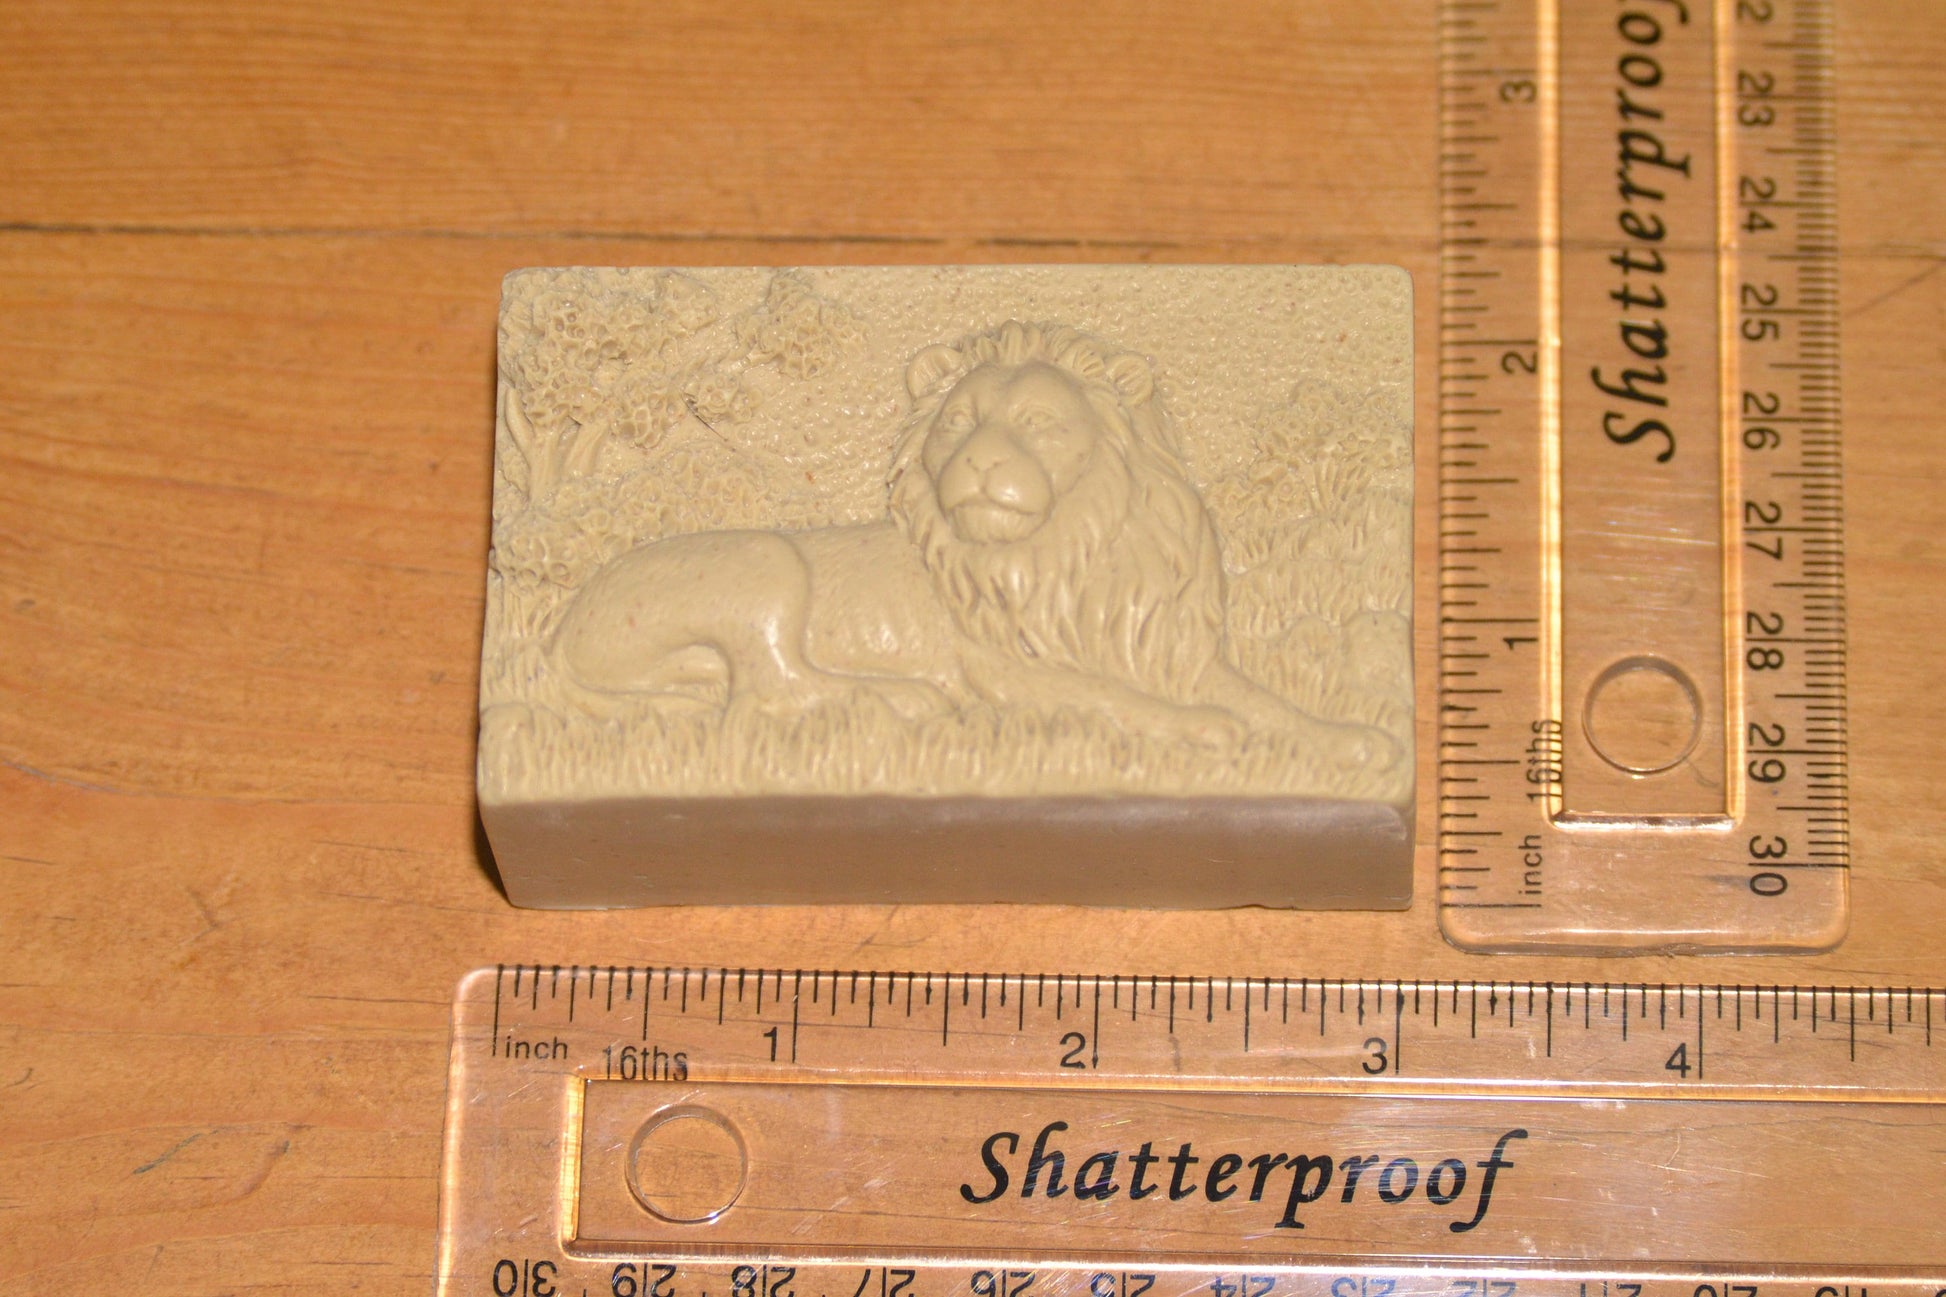 lion measures 3 x 2.25 inches